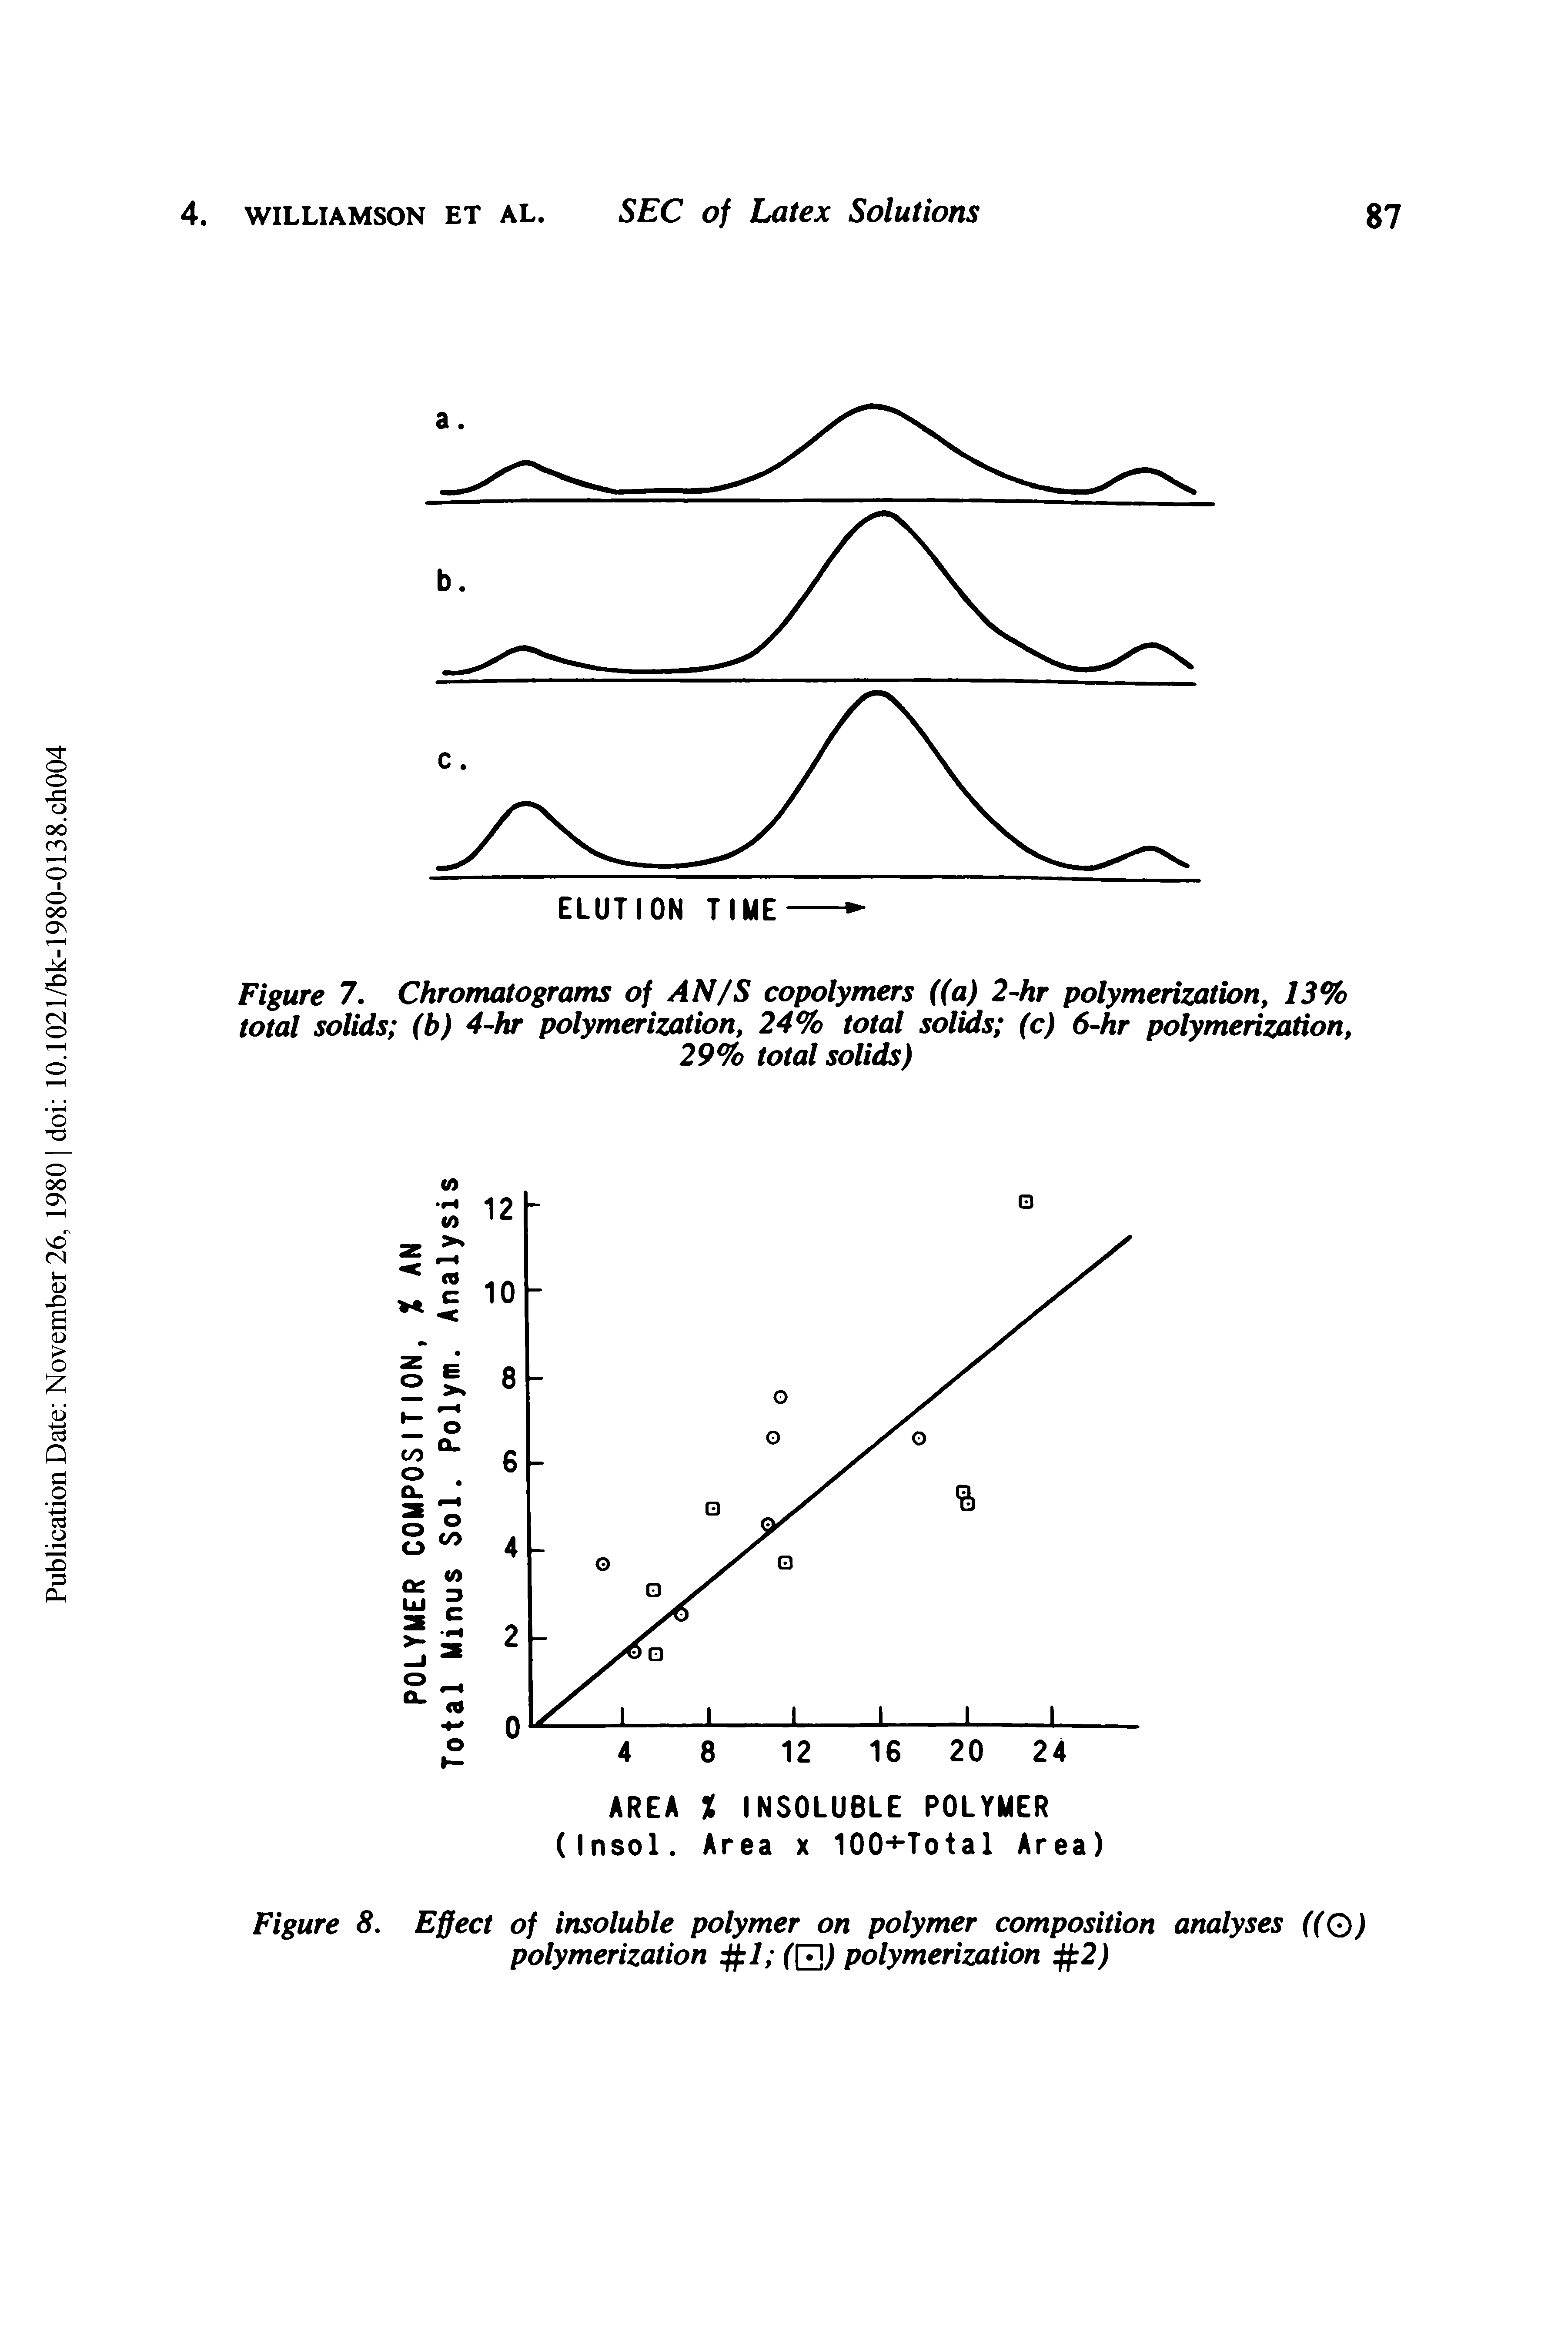 Figure 7. Chromatograms of AN/S copolymers ((a) 2 hr polymerization, 13% total solids (b) 4 hr polymerization, 24% total solids (c) 6-hr polymerization,...